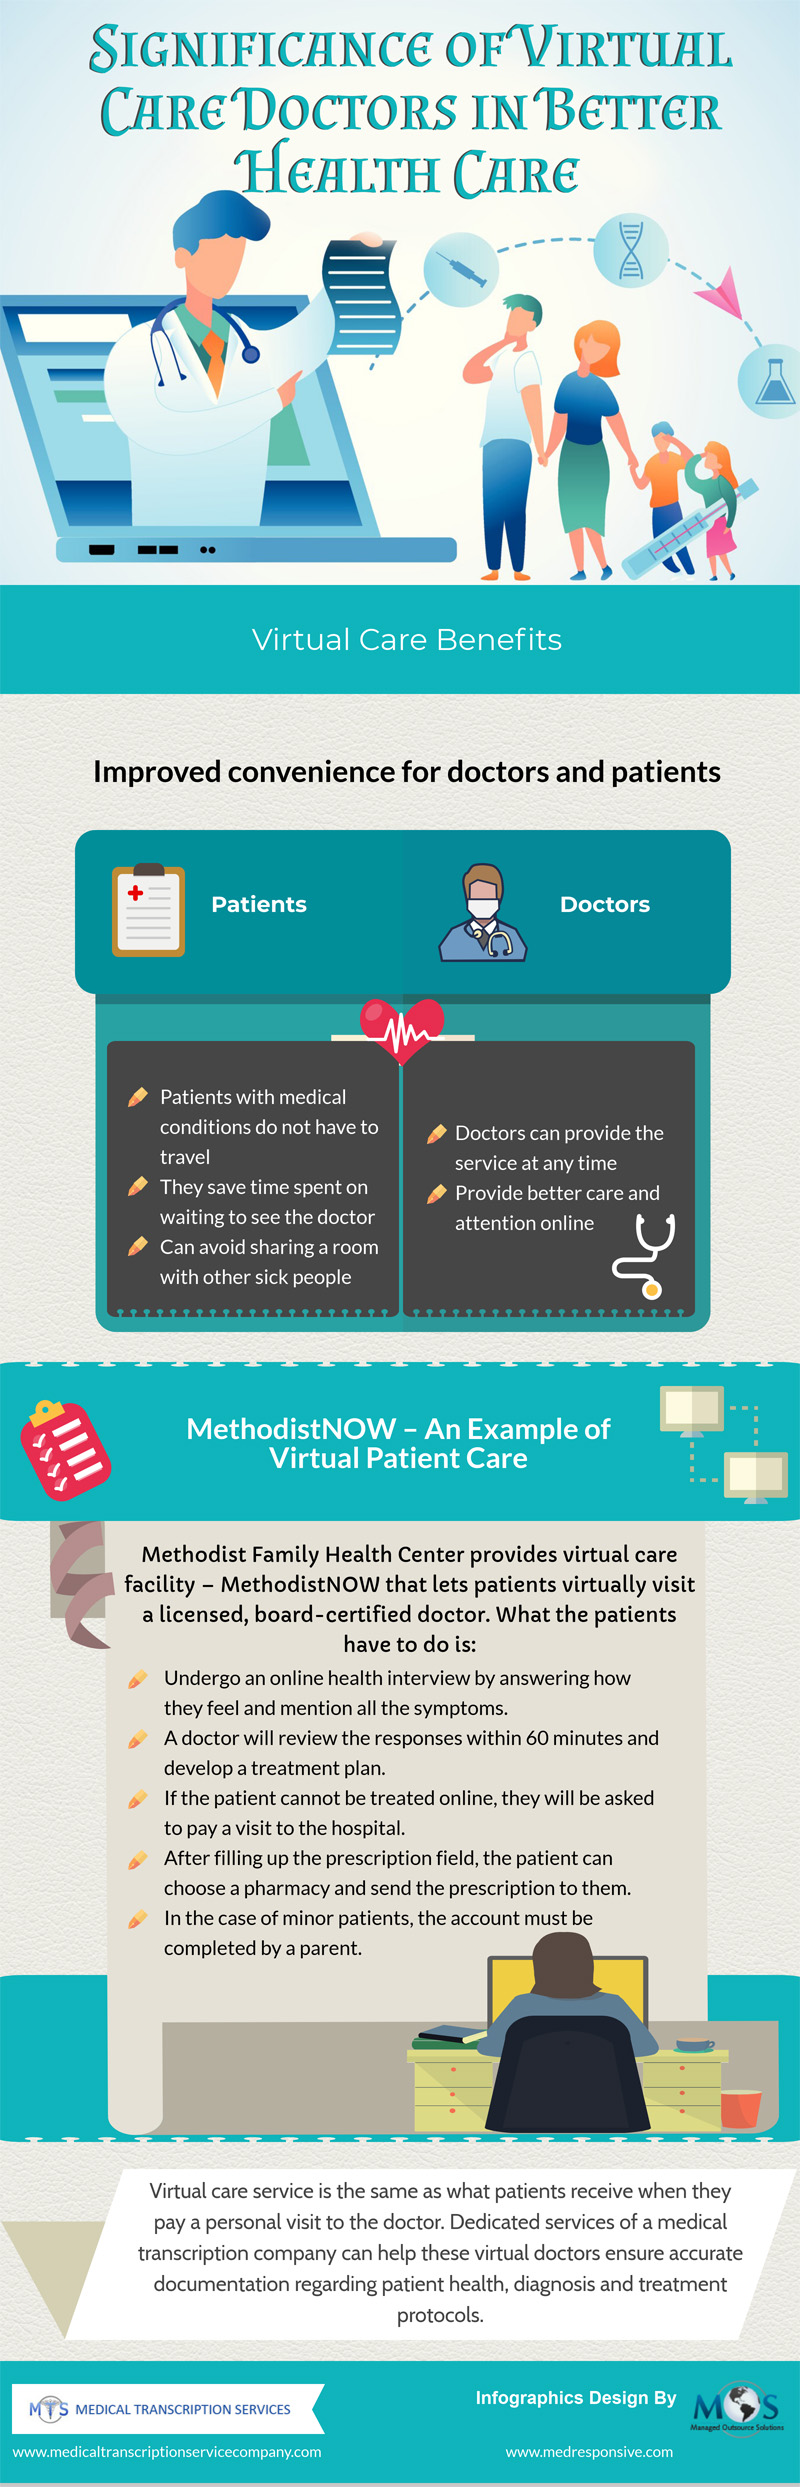 Significance of Virtual Care Doctors in Better Health Care